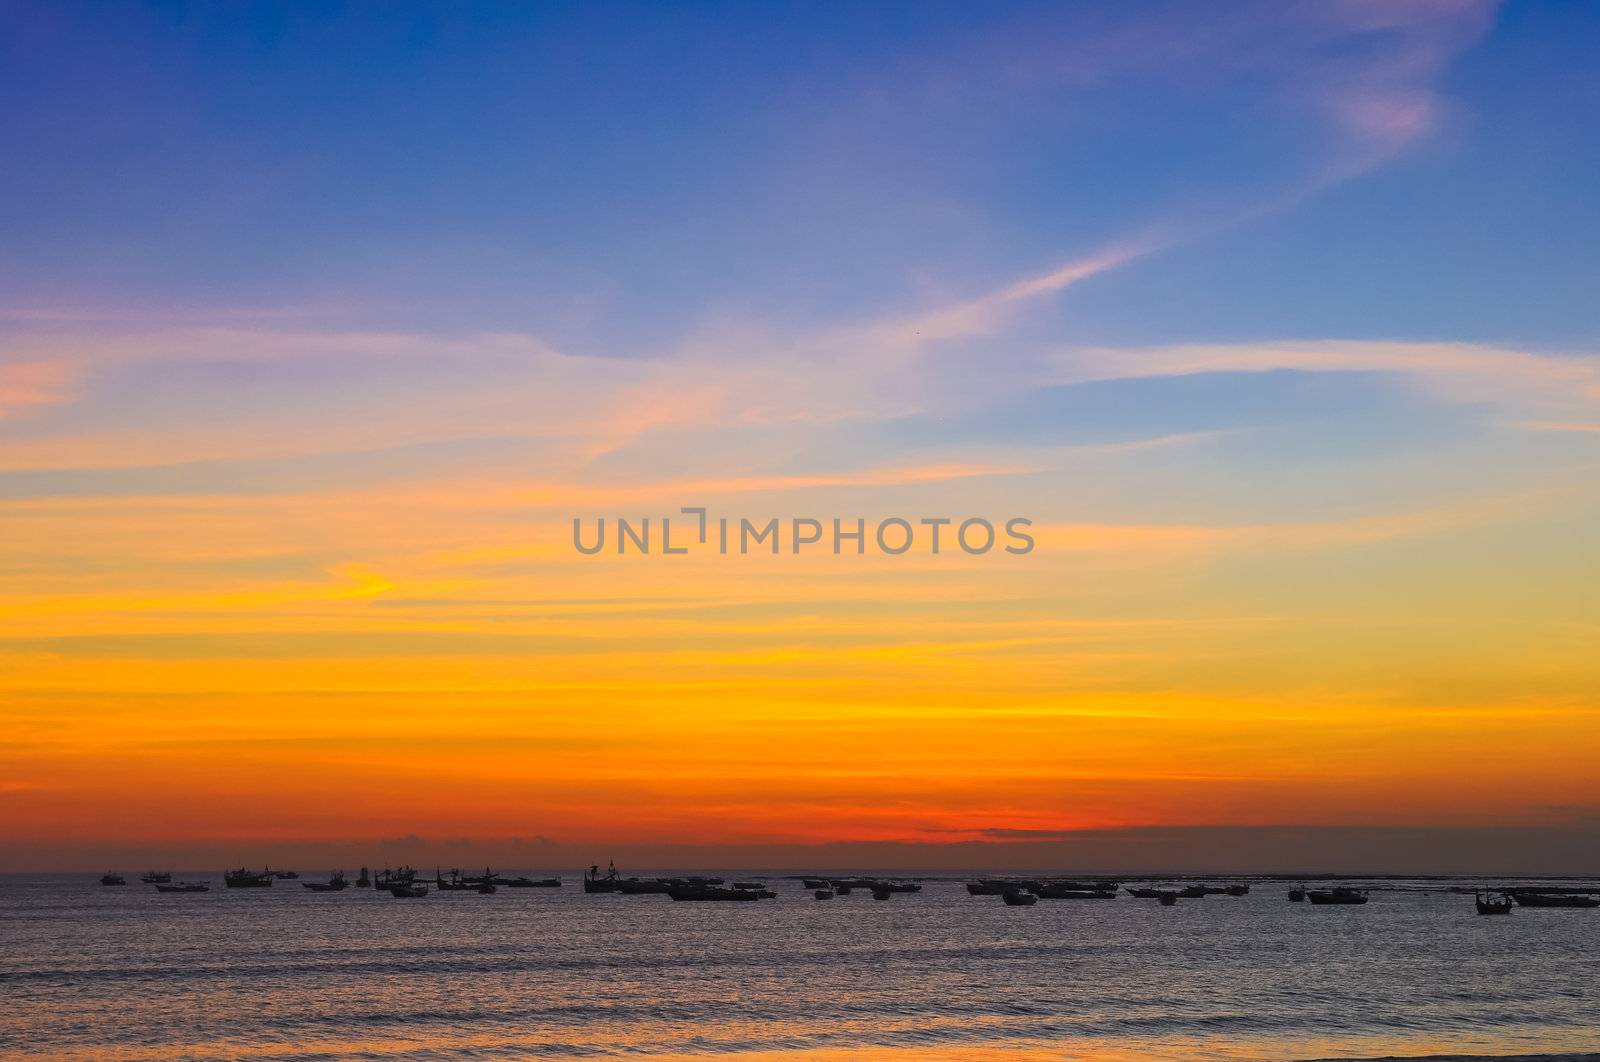 Ocean coast sunset and fishing boats, Bali by martinm303